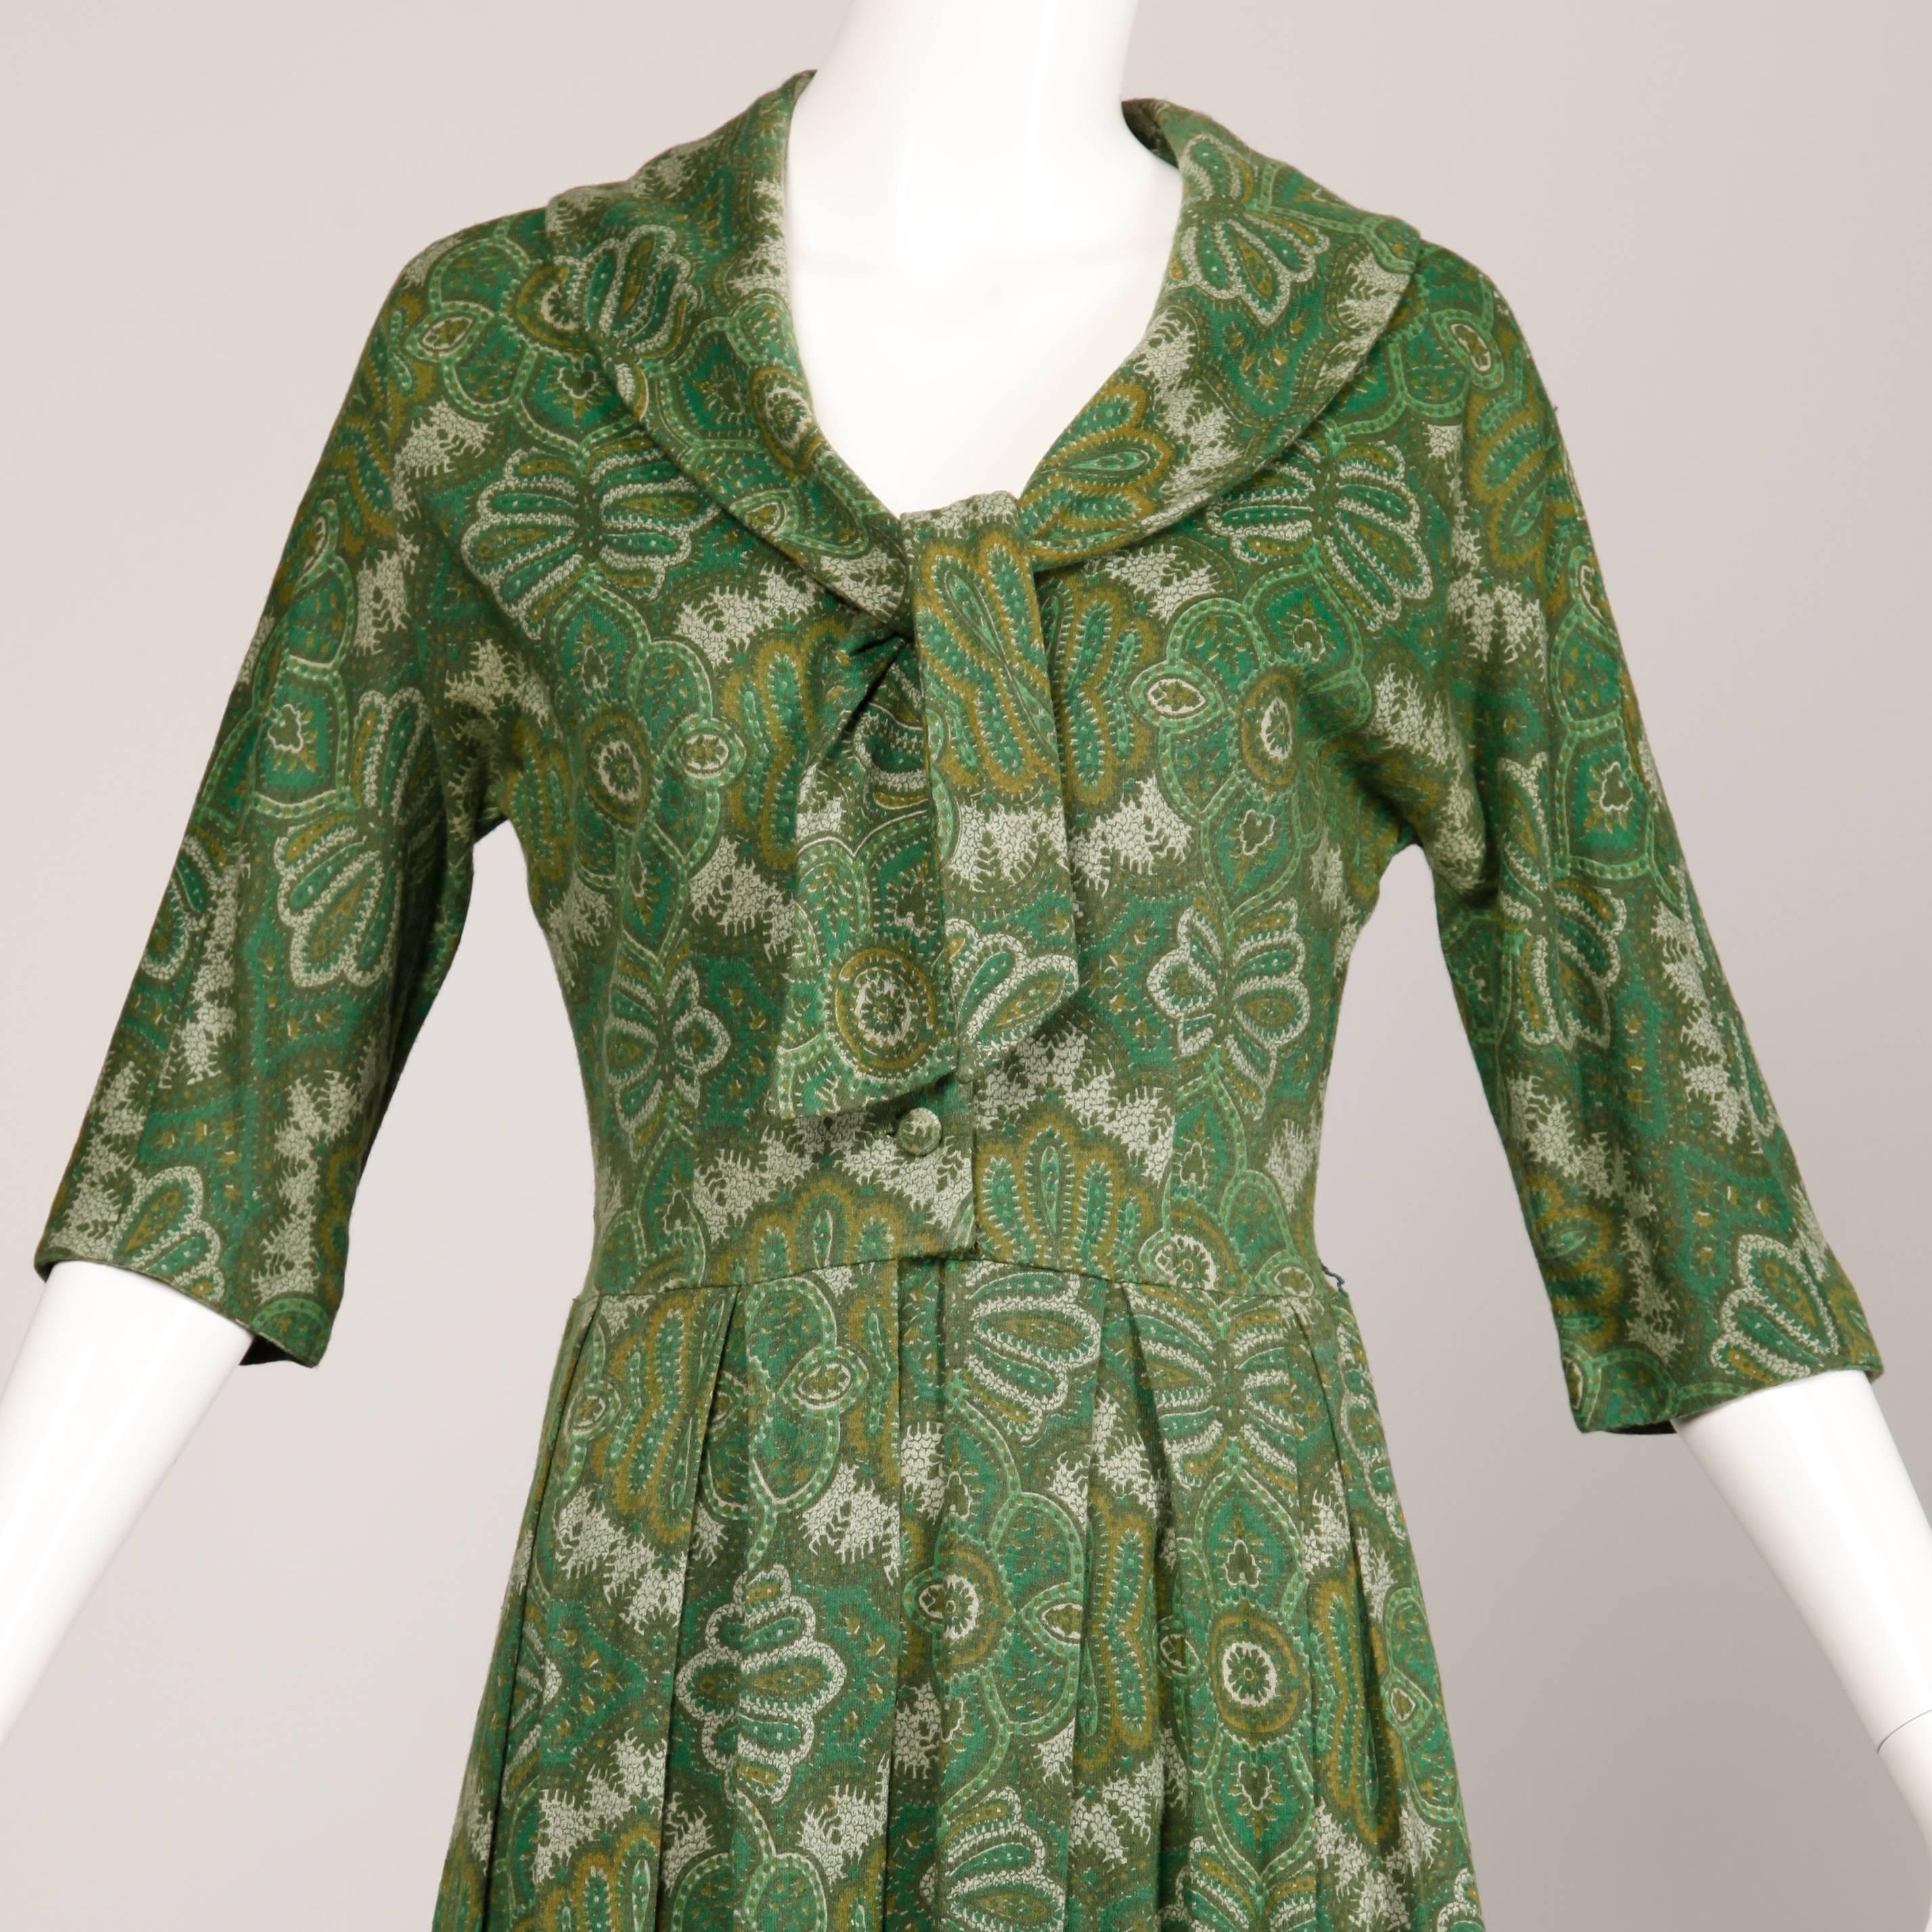 Women's 1950s Jerry Gilden Vintage Green Paisley Wool Pleated Dress with Ascot Tie